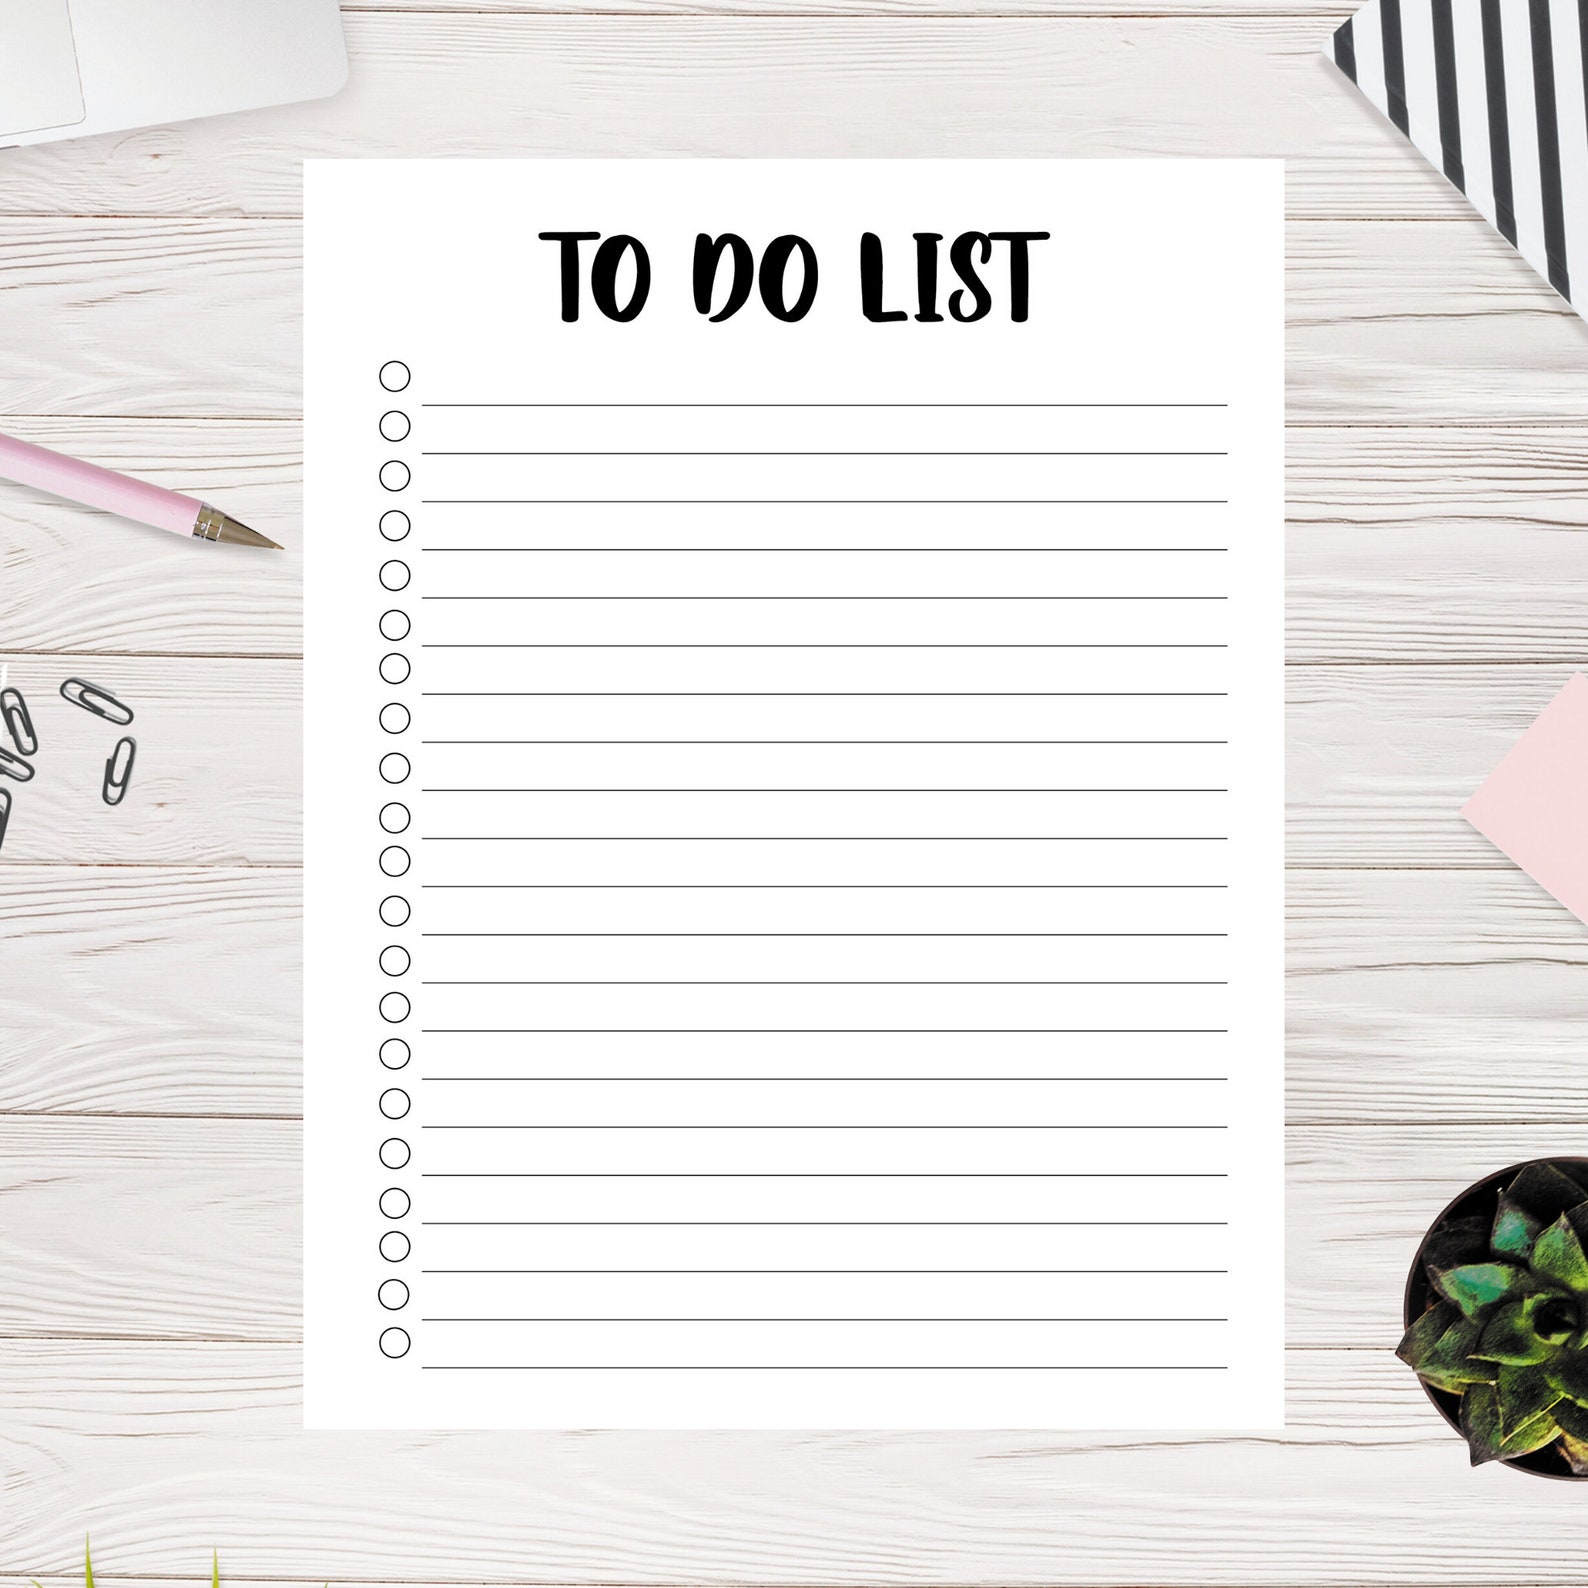 digital-to-do-list-goodnotes-to-do-list-to-do-list-etsy